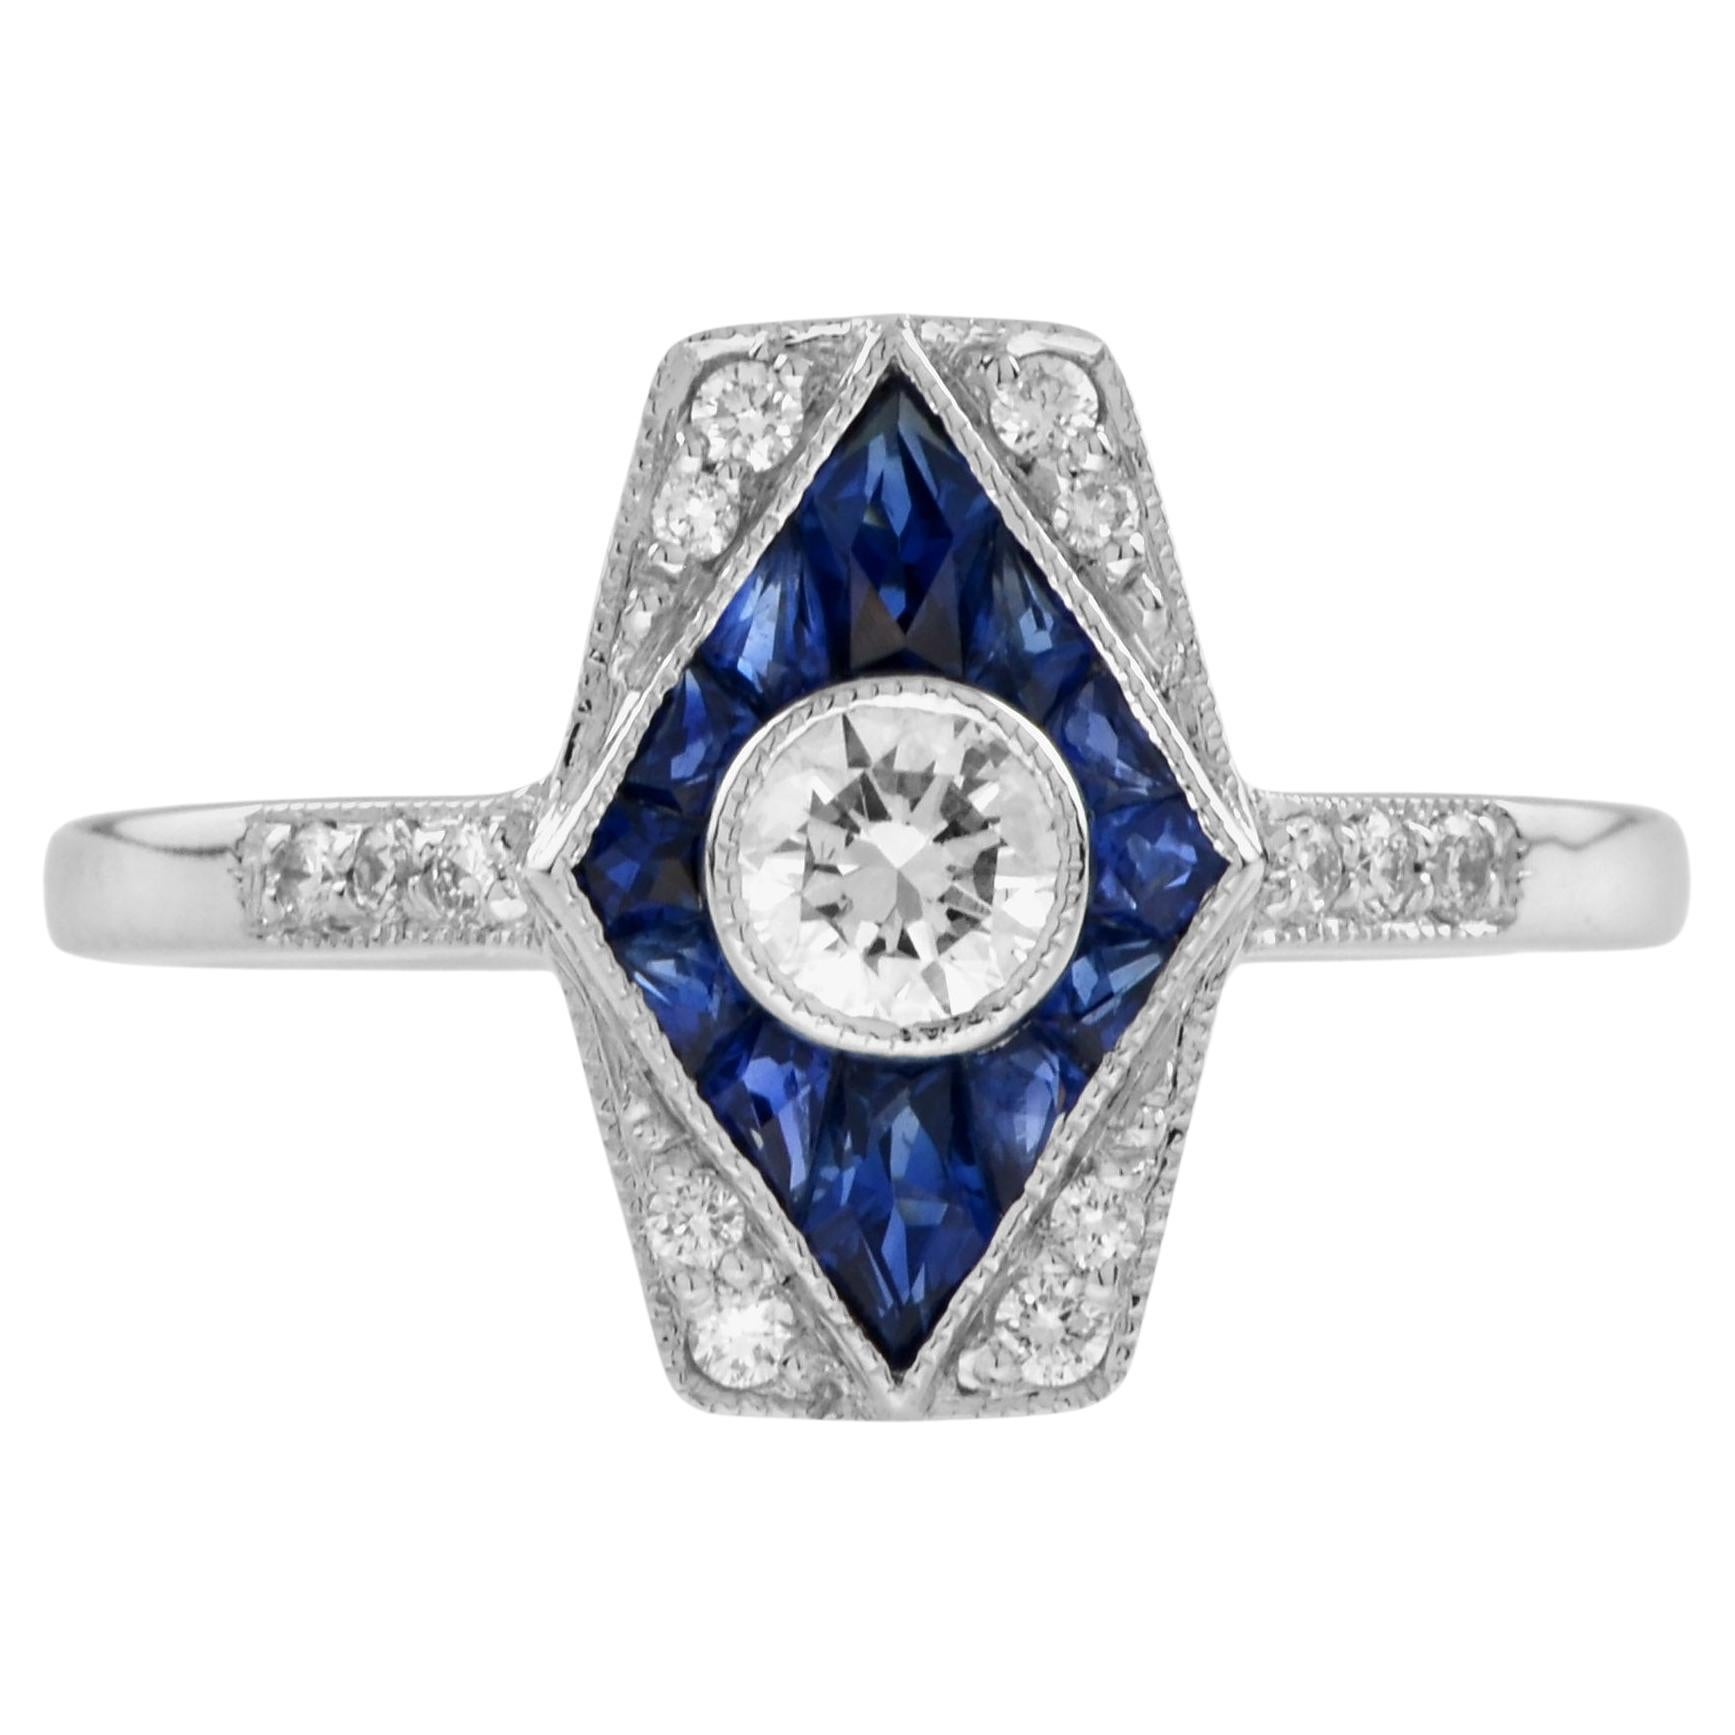 For Sale:  Diamond and Sapphire Art Deco Style Rhombus Engagement Ring in 18K White Gold